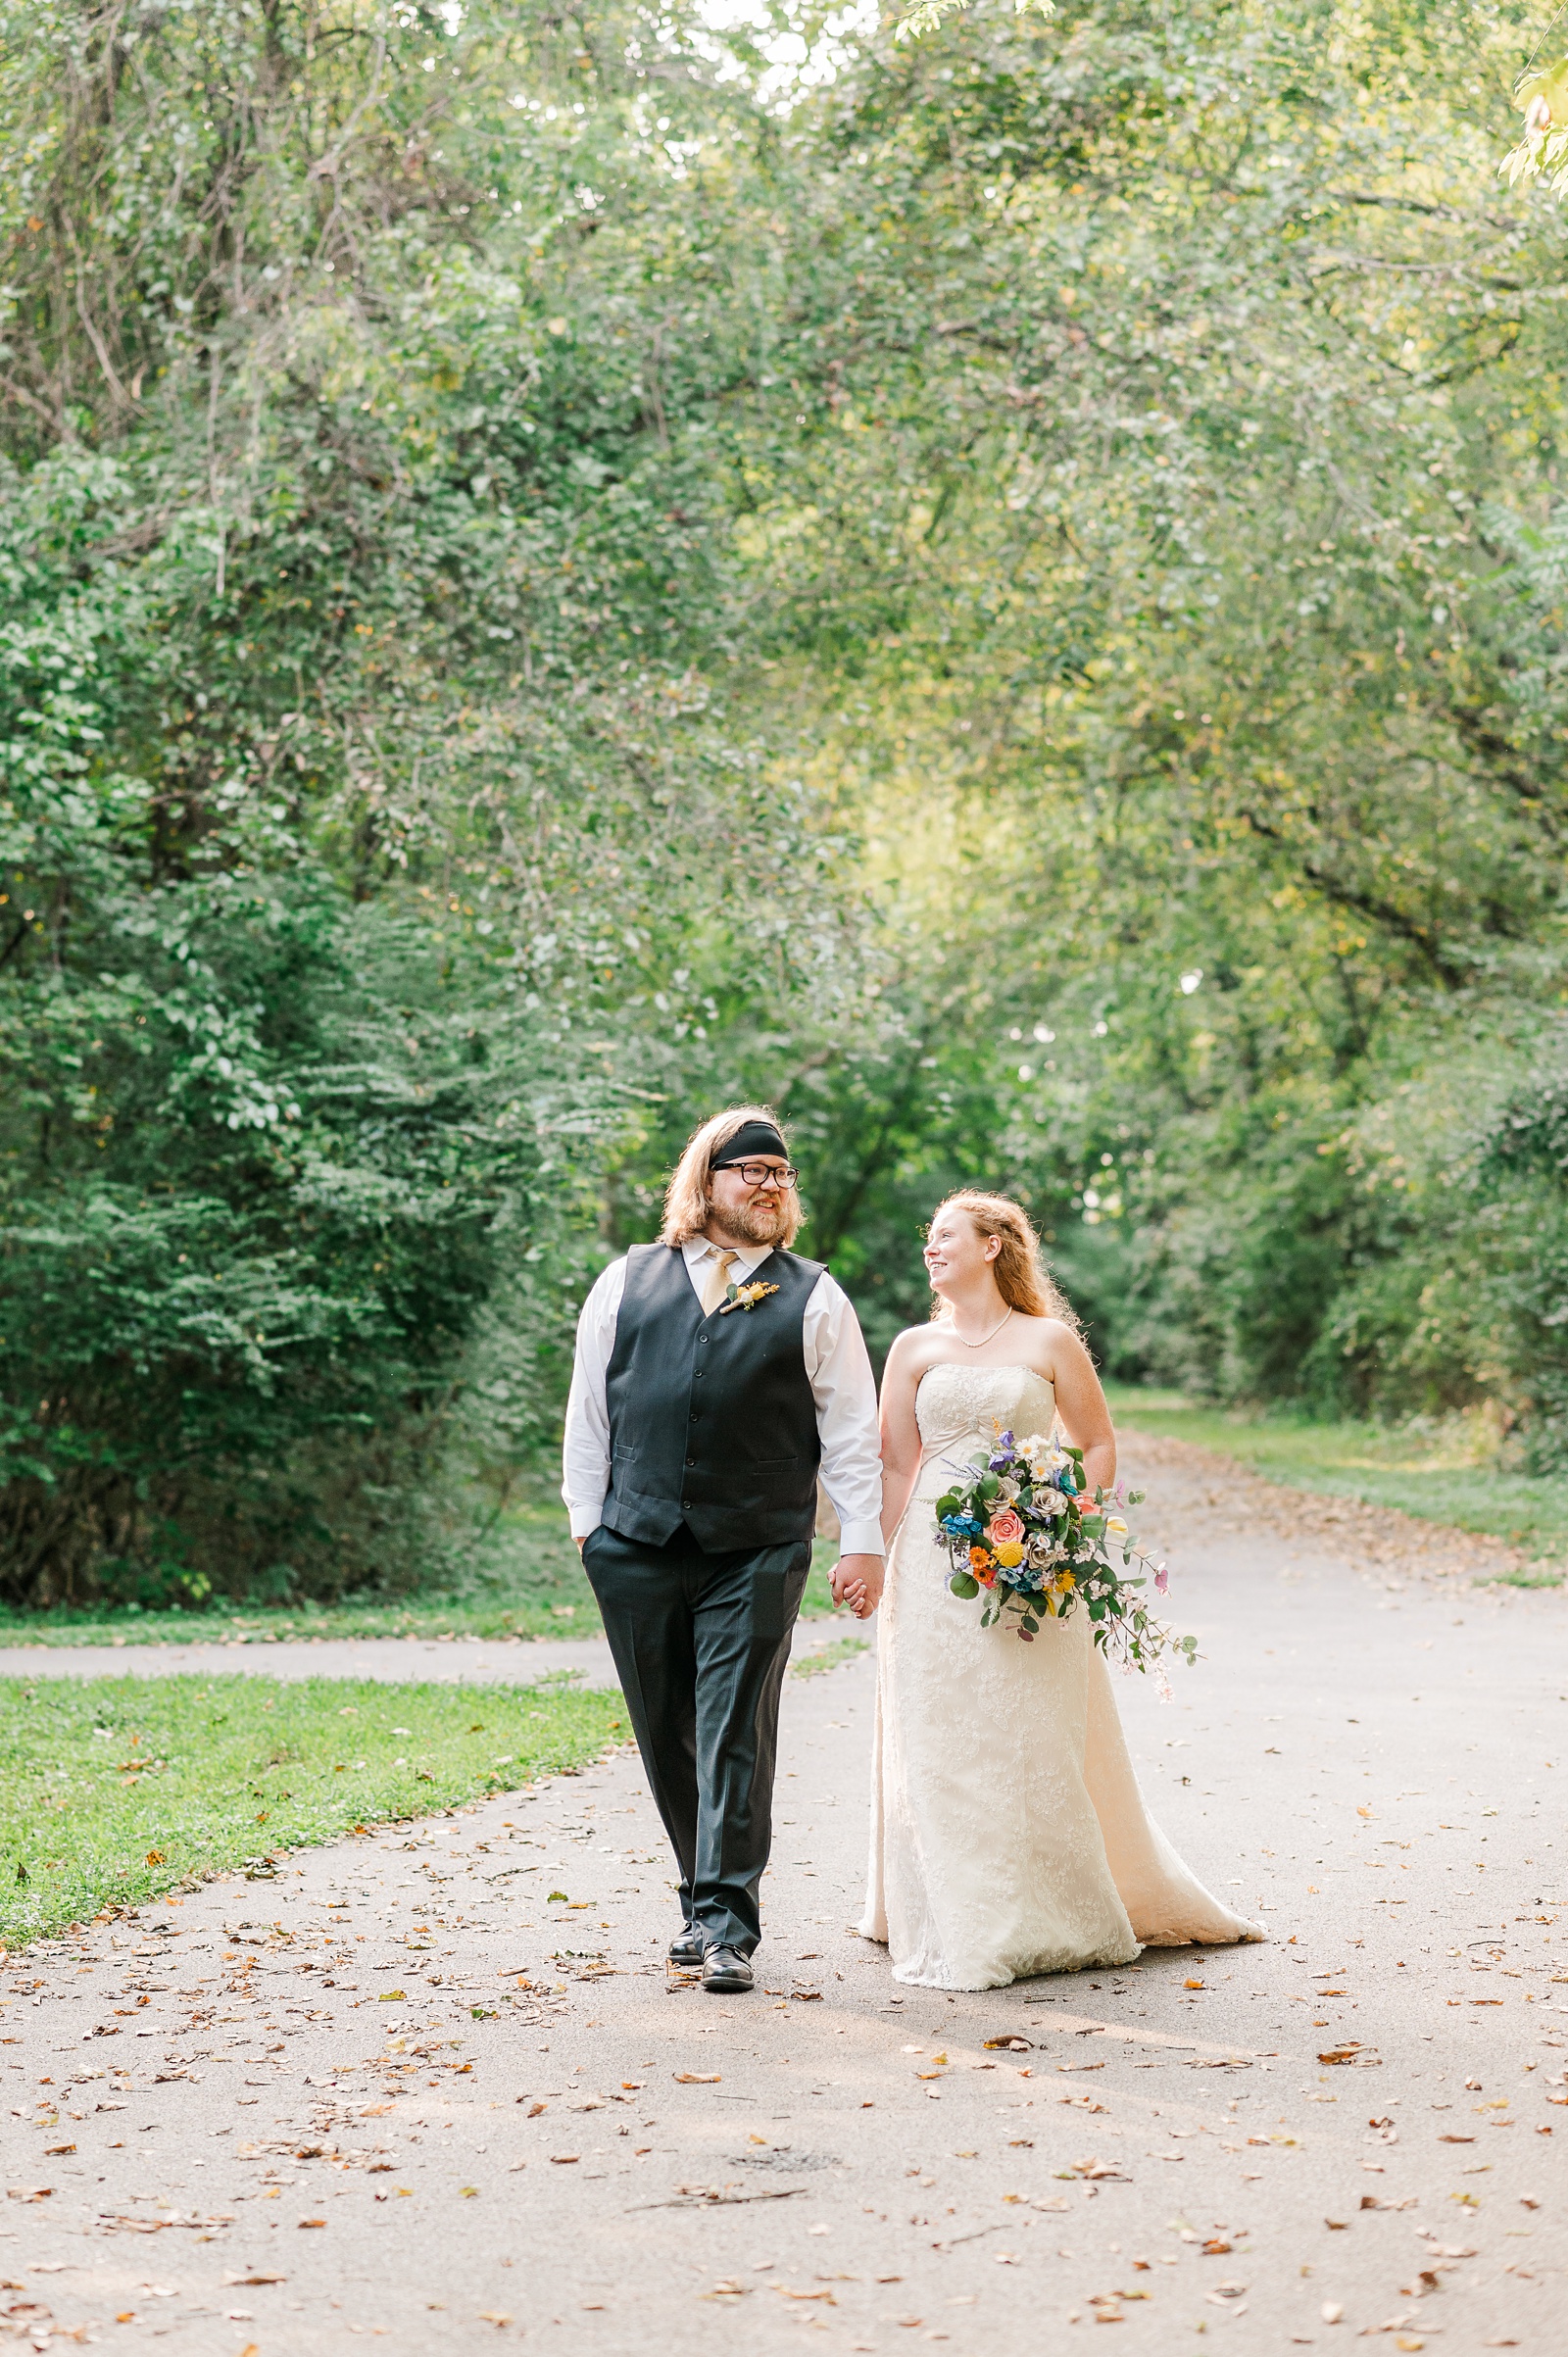 Bride and Groom Portraits during Intimate Ceremony at Osbourne Park in Richmond. Photography by Virginia Wedding Photographer Kailey Brianne Photography. 